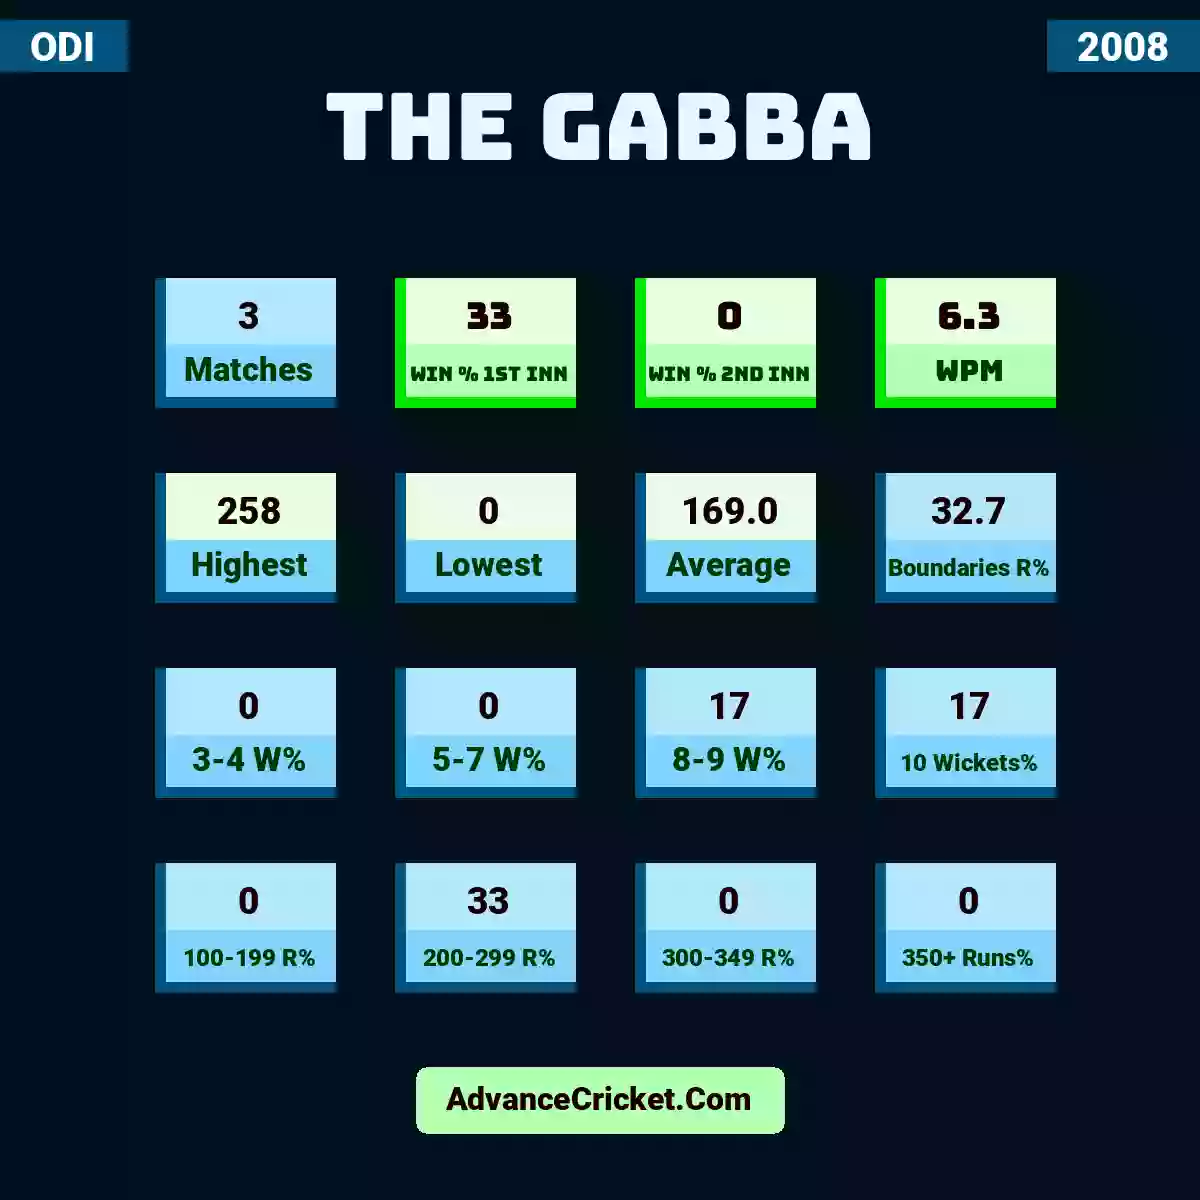 Image showing The Gabba with Matches: 3, Win % 1st Inn: 33, Win % 2nd Inn: 0, WPM: 6.3, Highest: 258, Lowest: 0, Average: 169.0, Boundaries R%: 32.7, 3-4 W%: 0, 5-7 W%: 0, 8-9 W%: 17, 10 Wickets%: 17, 100-199 R%: 0, 200-299 R%: 33, 300-349 R%: 0, 350+ Runs%: 0.